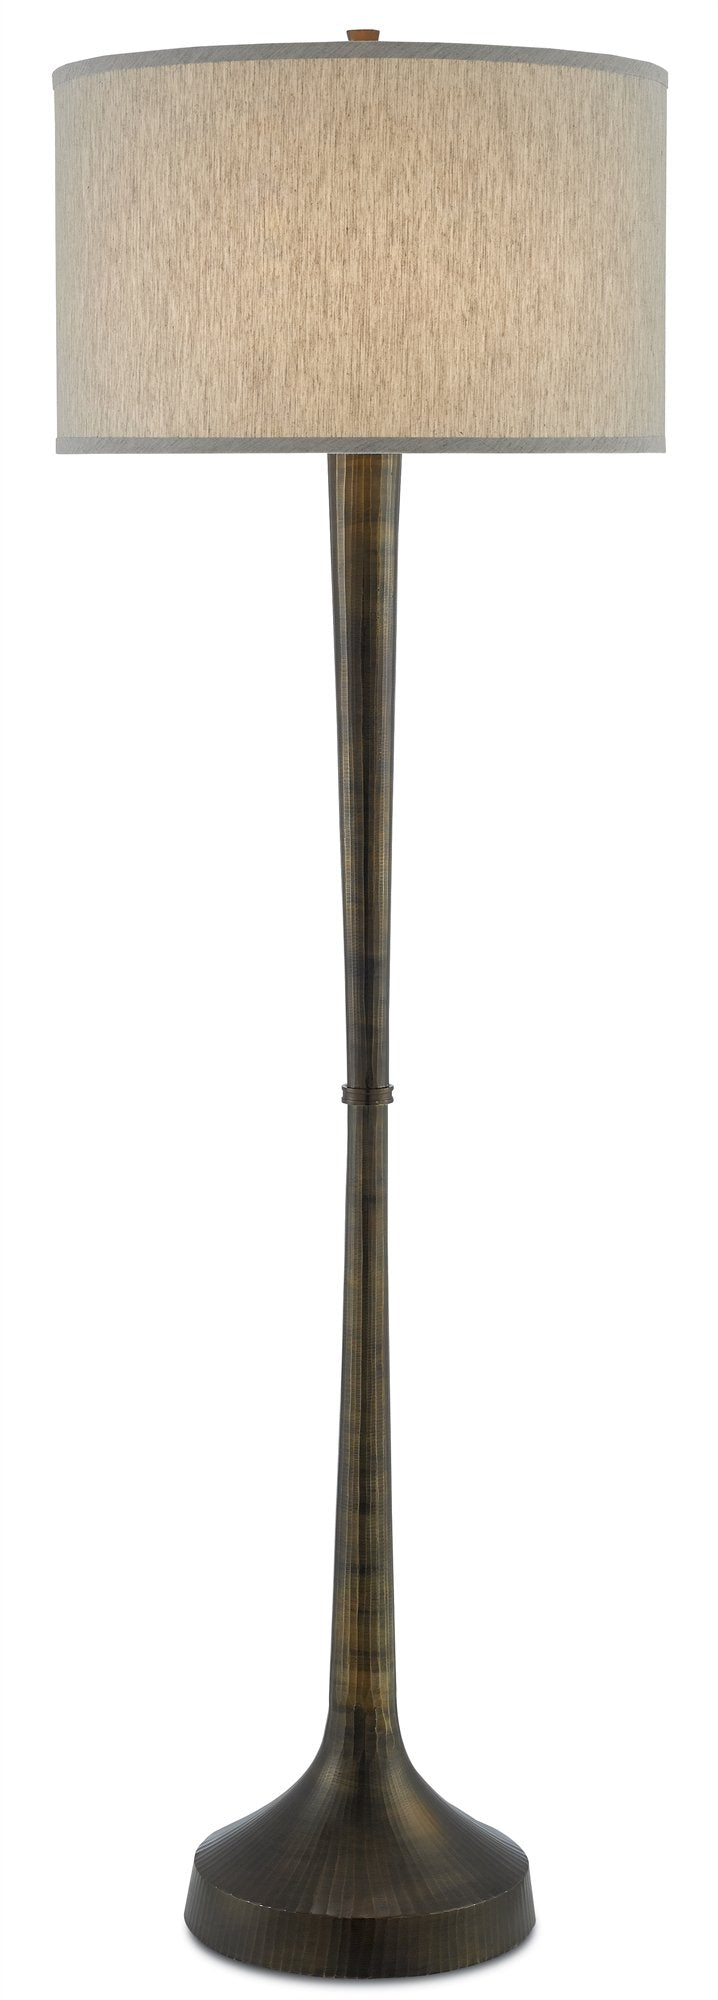 Luca Floor Lamp design by Currey and Company